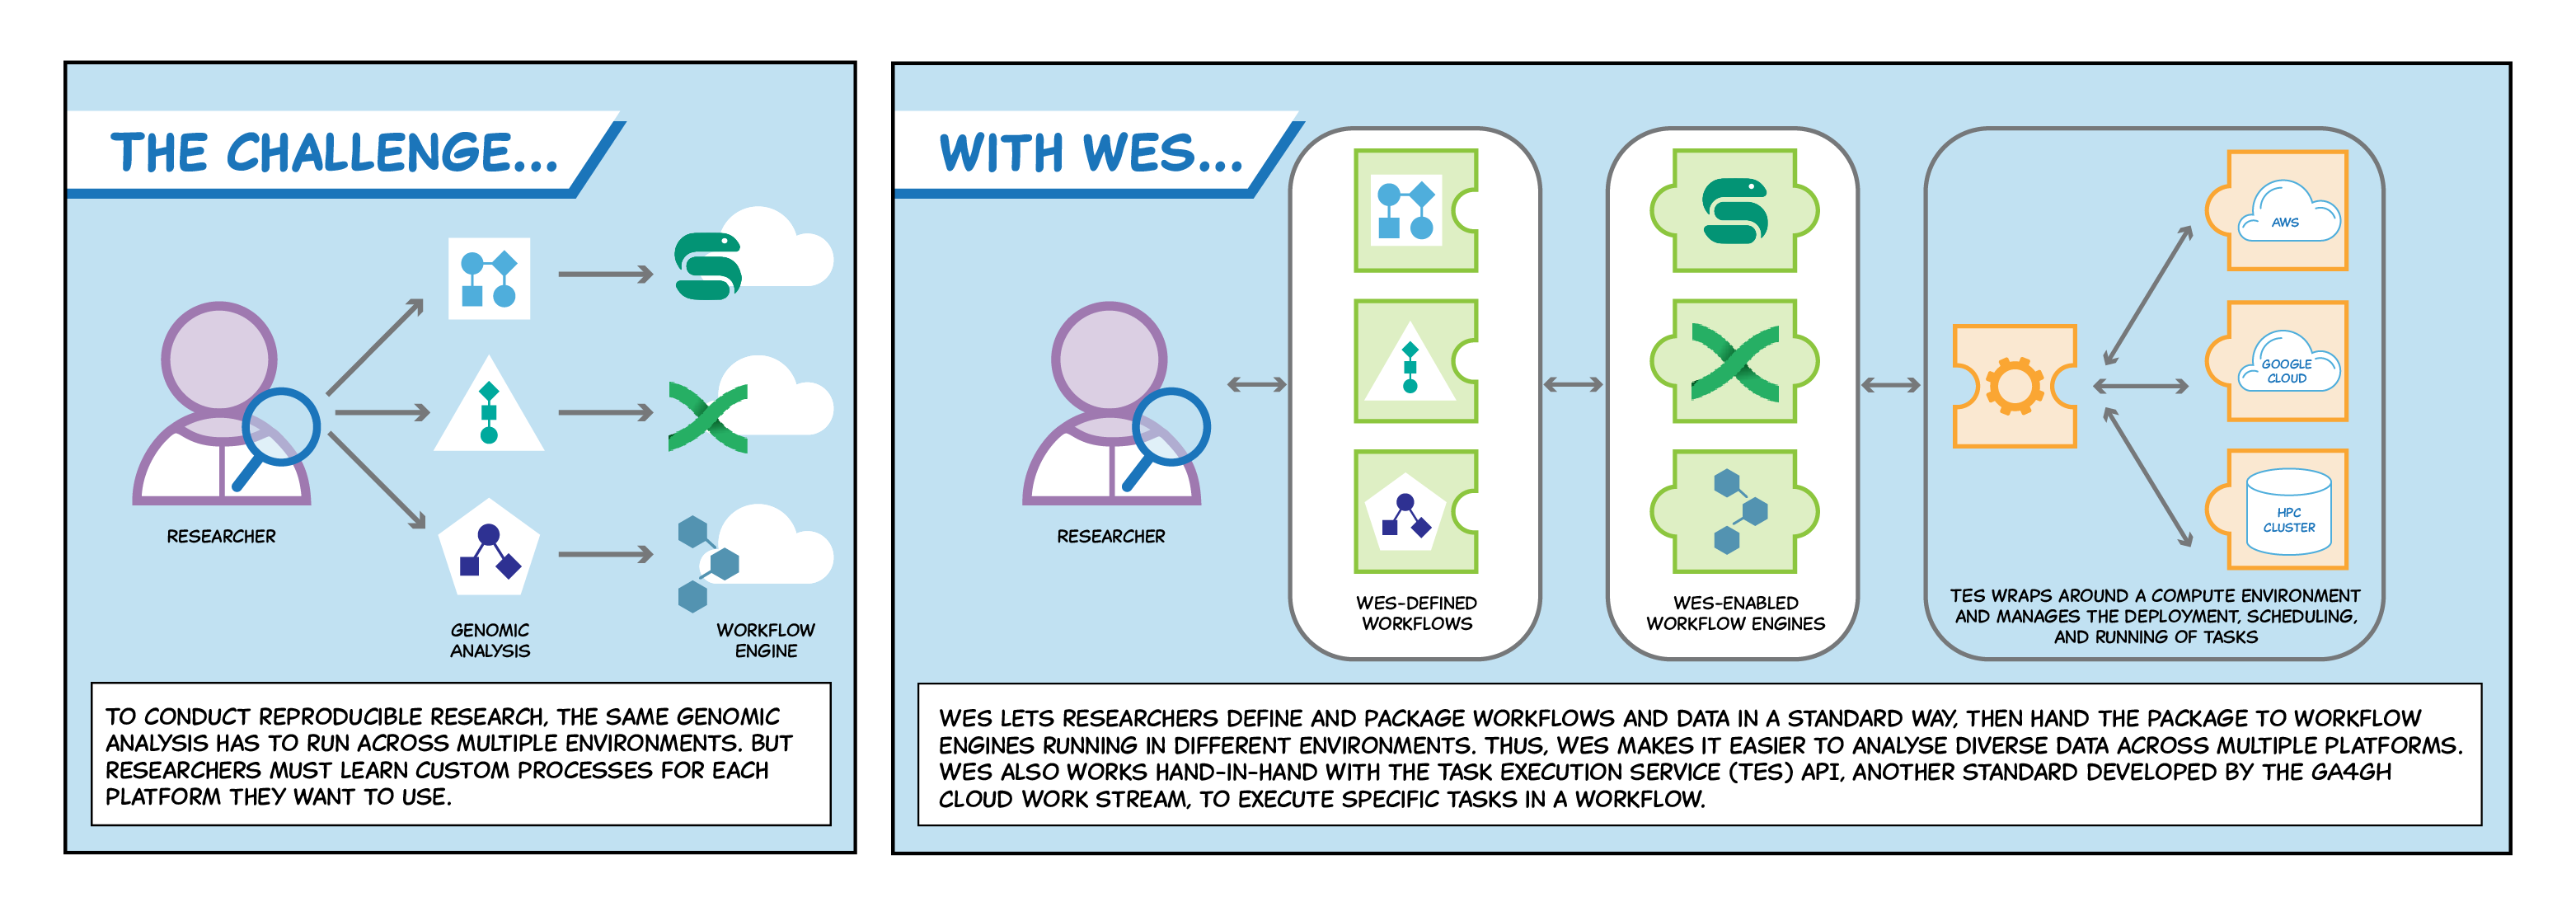 A comic describing the challenges of running reproducible research and how the Workflow Execution Service (WES) API helps.